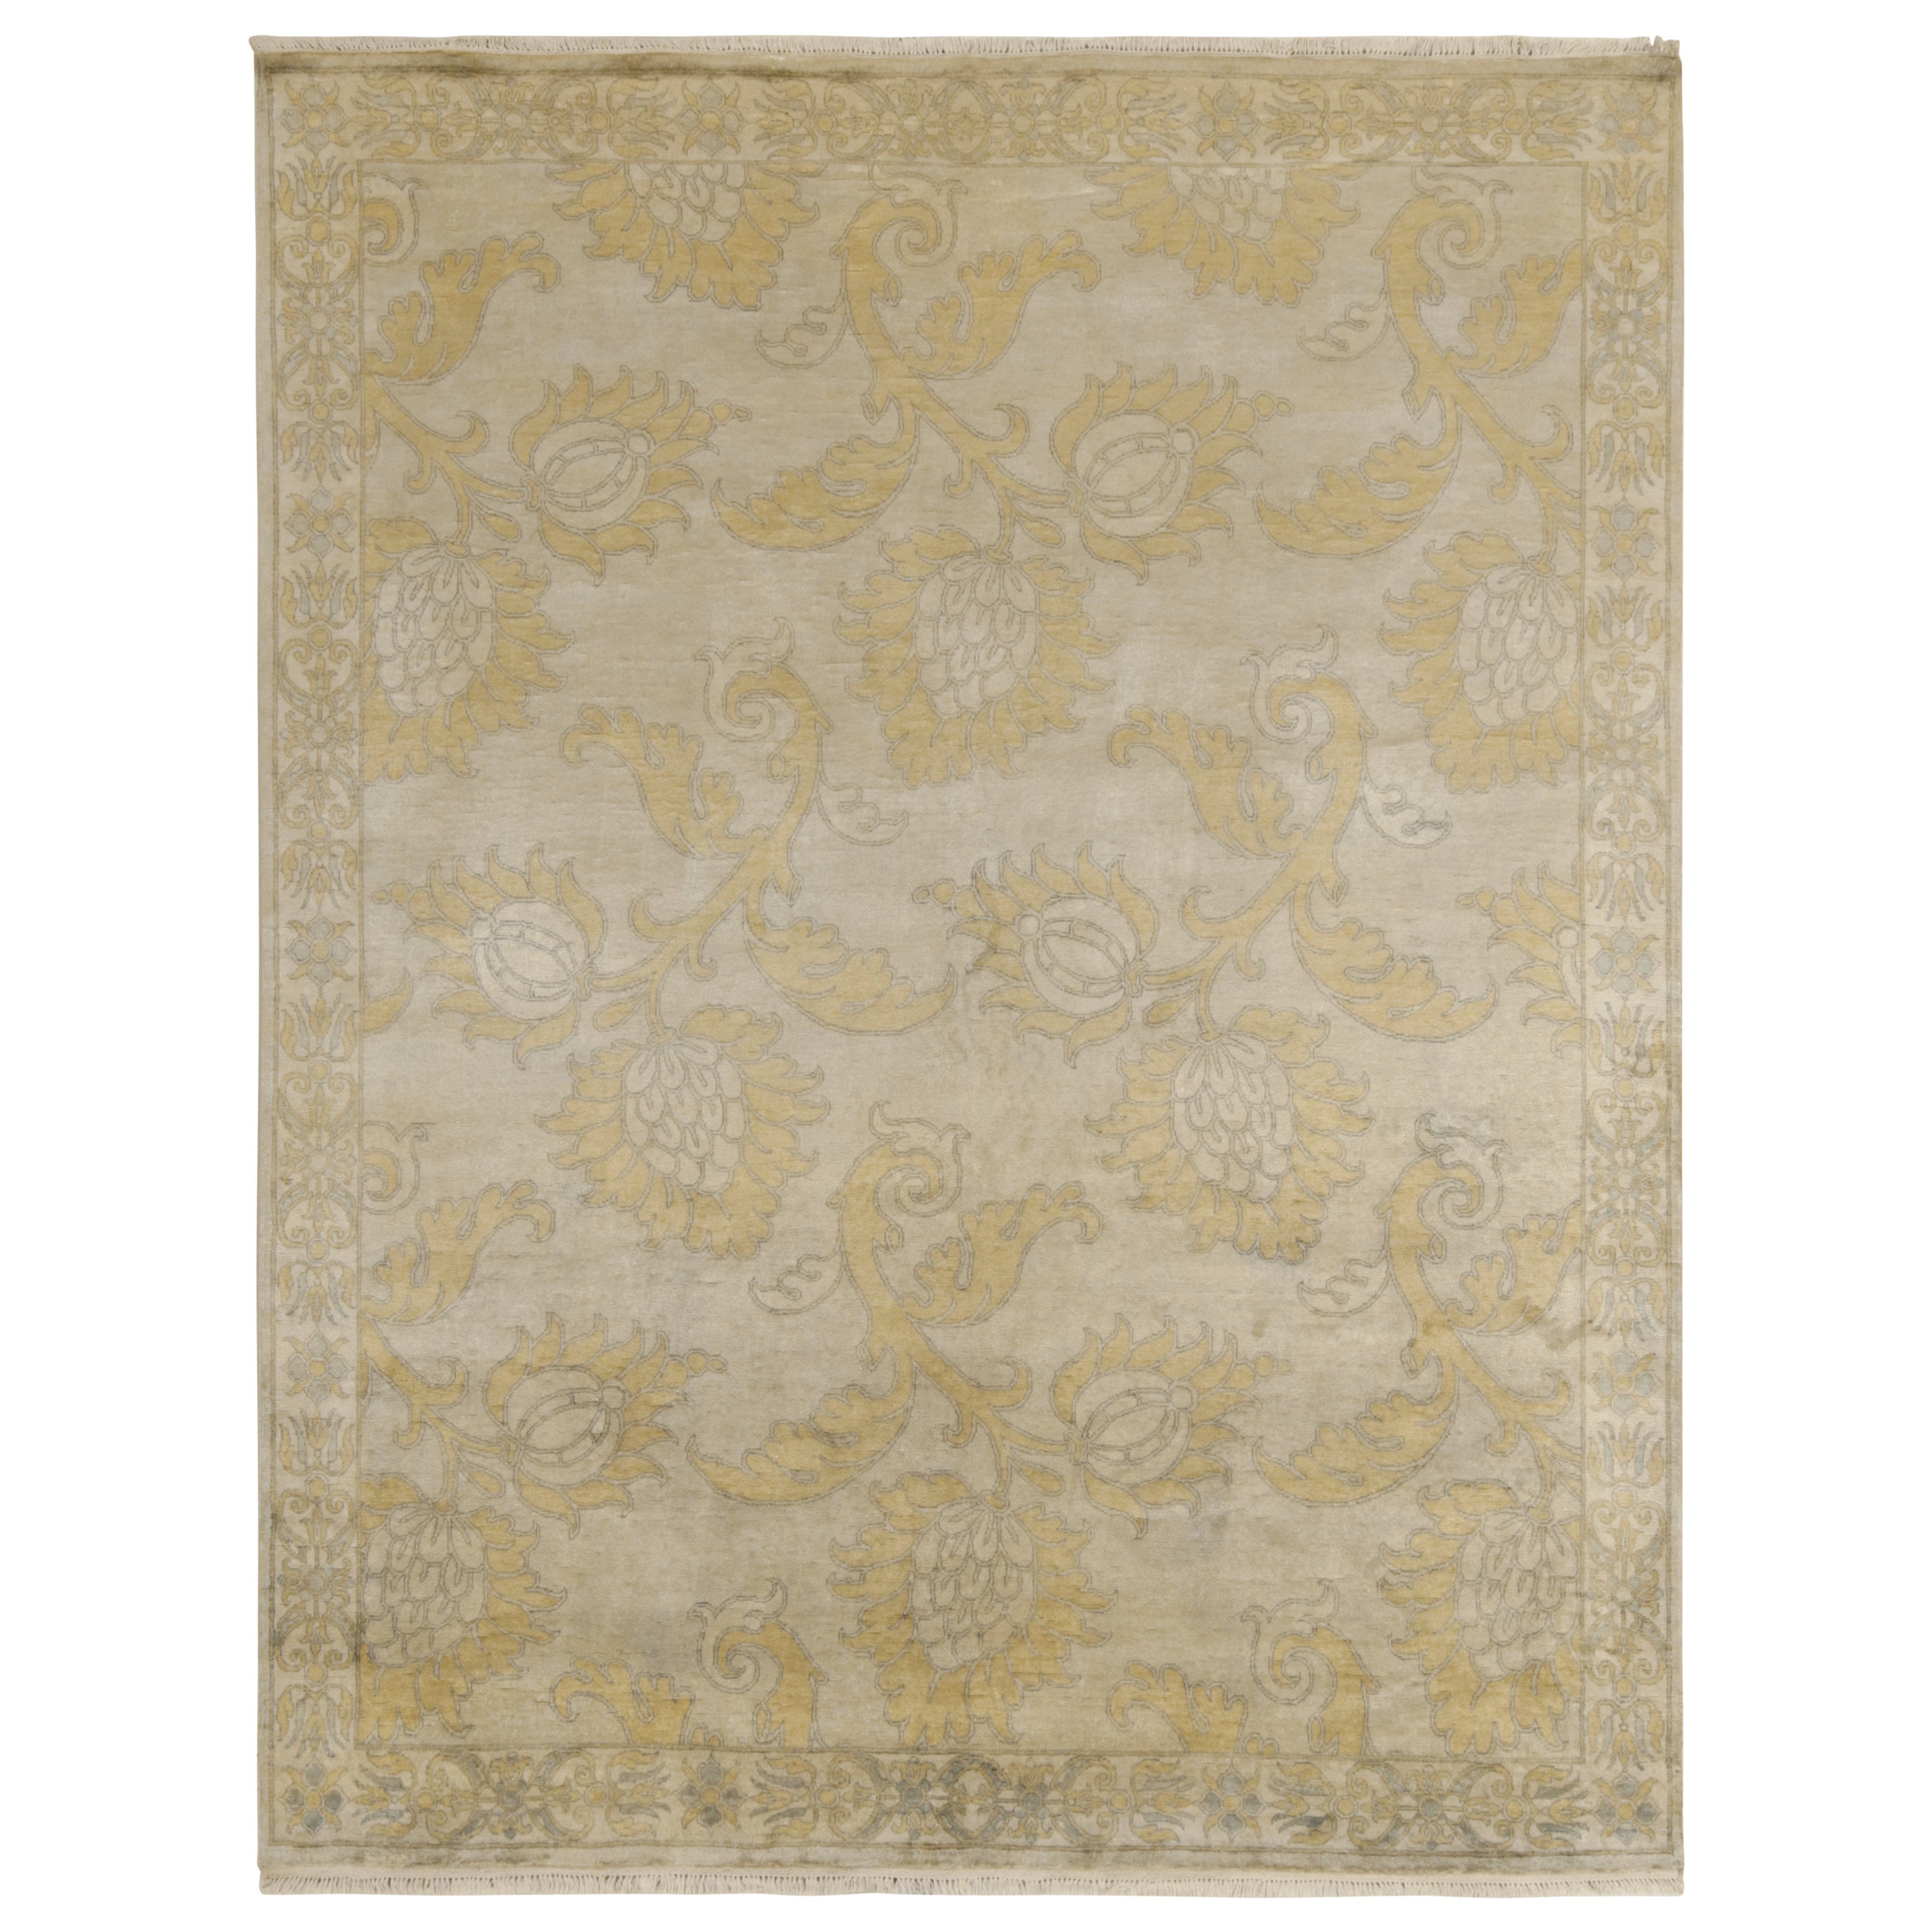 Rug & Kilim’s Classic Style rug in Tan with Blue and Gold Floral Patterns